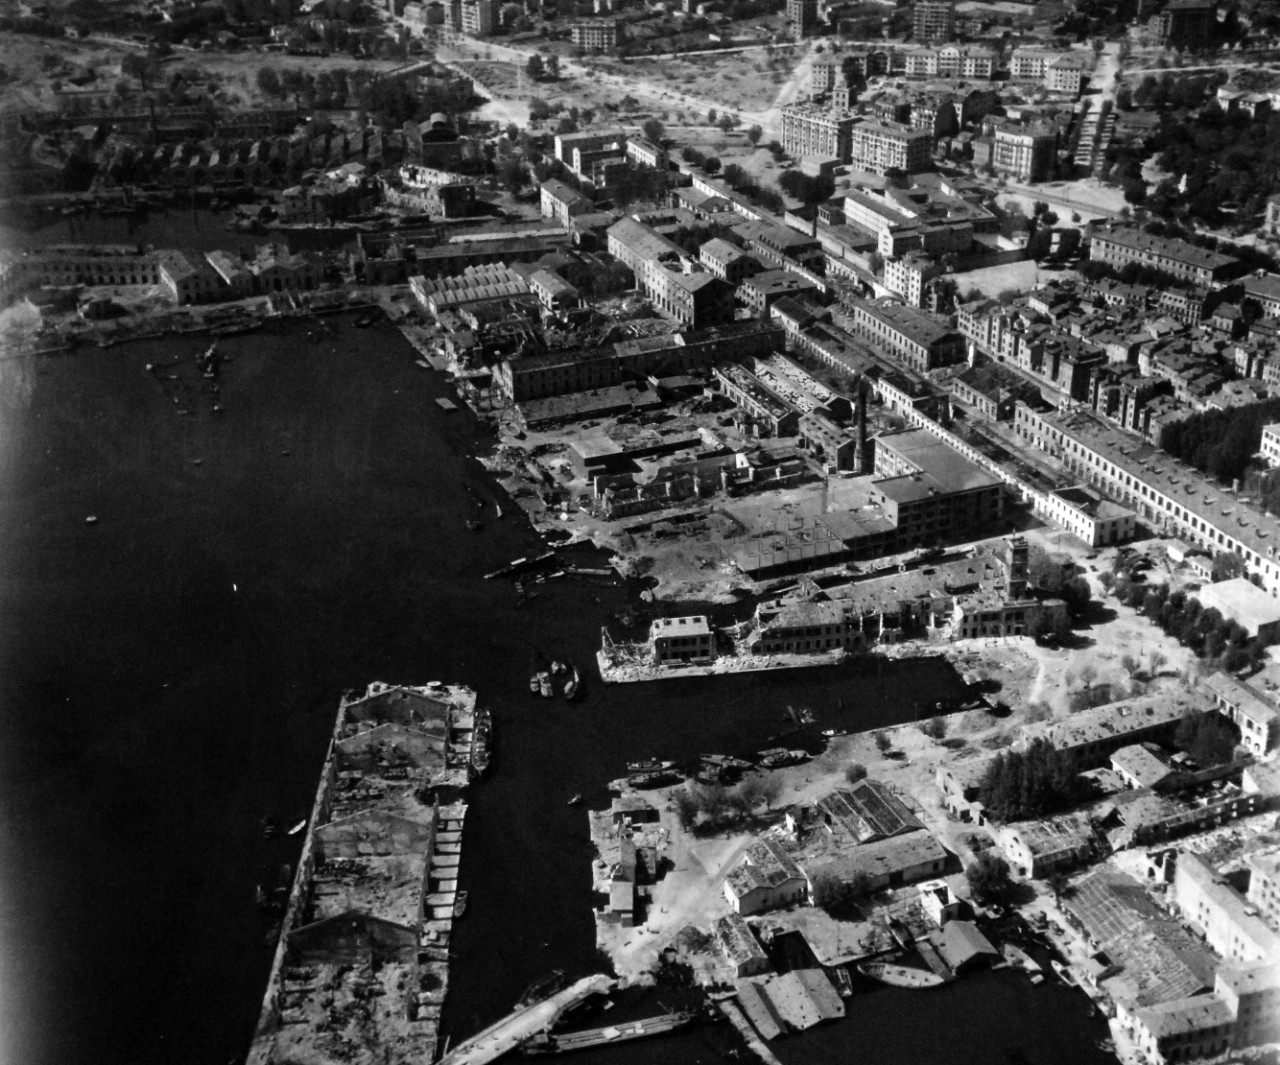 80-G-364003:  Invasion of Southern France, Toulon, August 1944.   Aerial view of the destruction to the harbor and installations at Toulon, France.  Taken by crew of USS Catoctin   (AGC 5).  Photograph received on 2 April 1946.   Official U.S. Navy Photograph, now in the collections of the National Archives.  (2014/7/10).